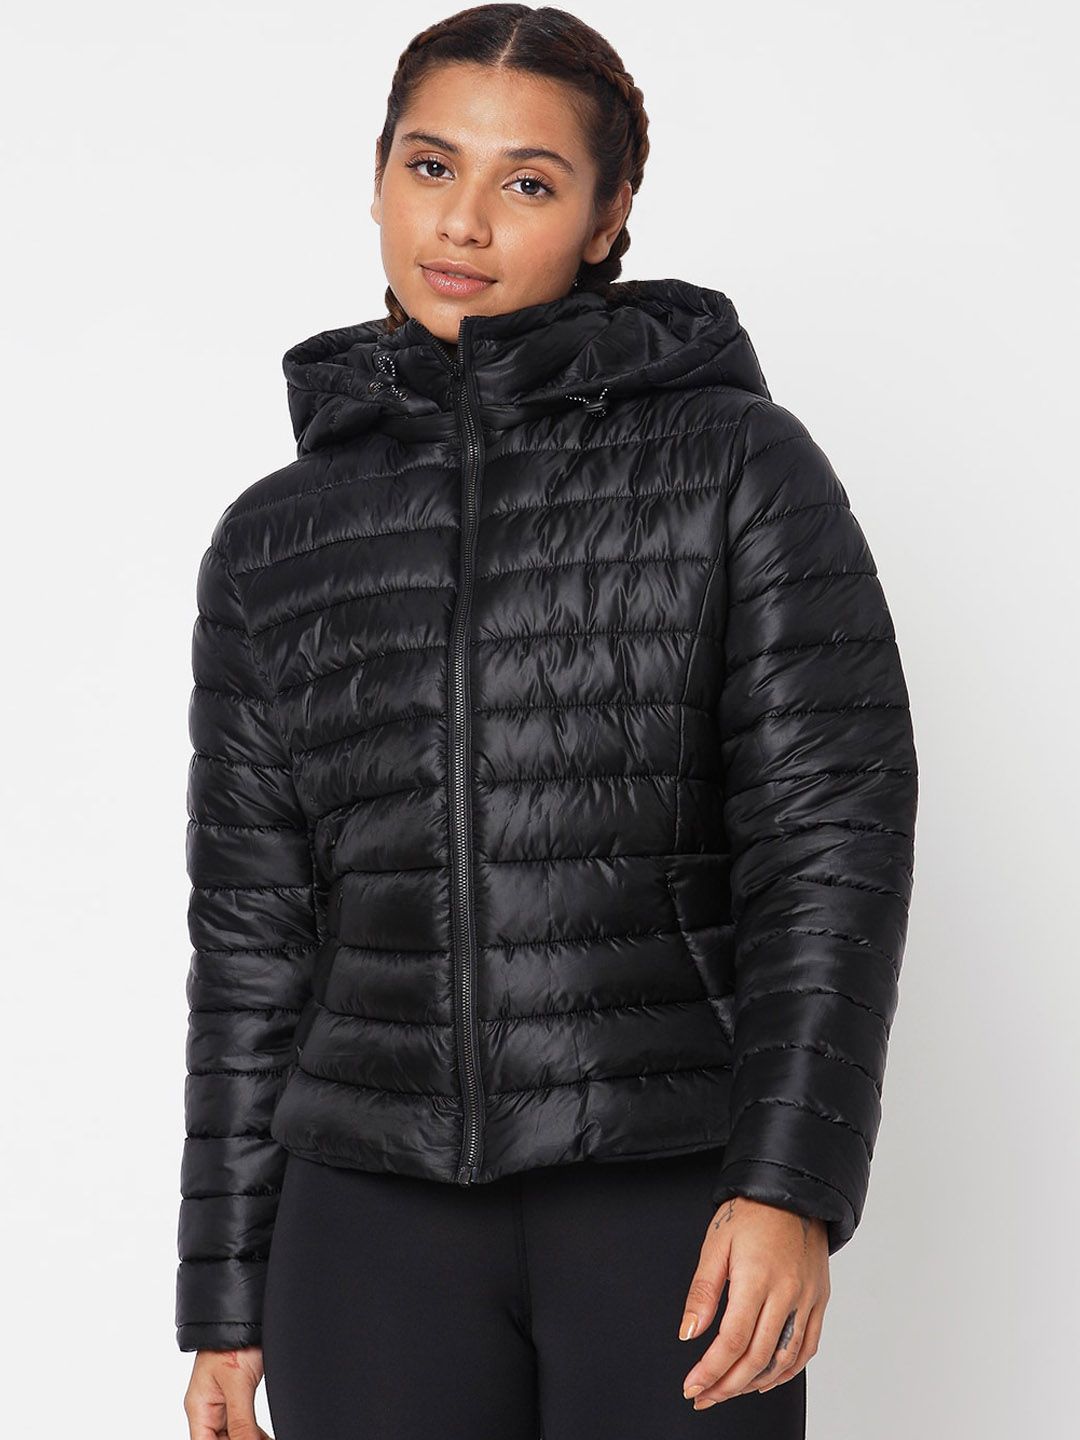 Silvertraq Women Black Solid Puffer Jacket Price in India